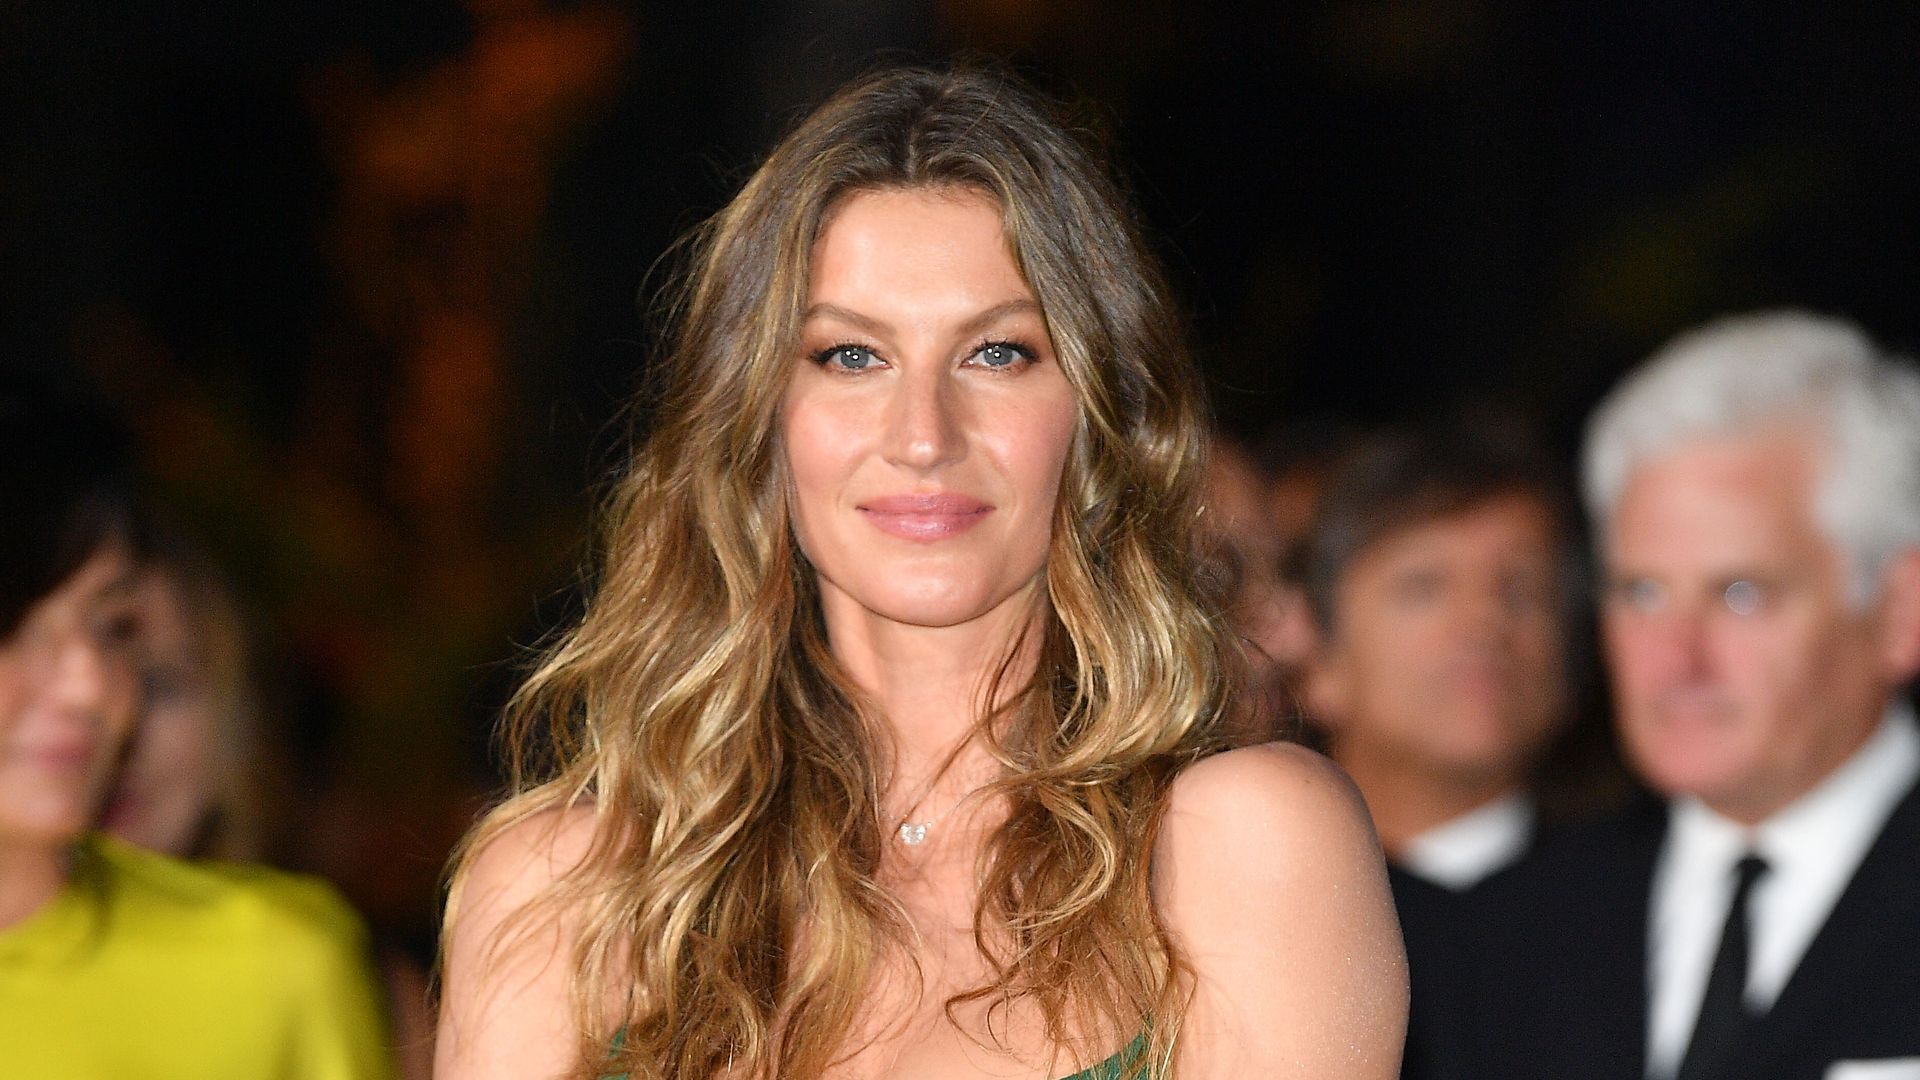 Gisele Bündchen Now, Here's What Victoria's Secret's Top Models Are Up to  in 2022